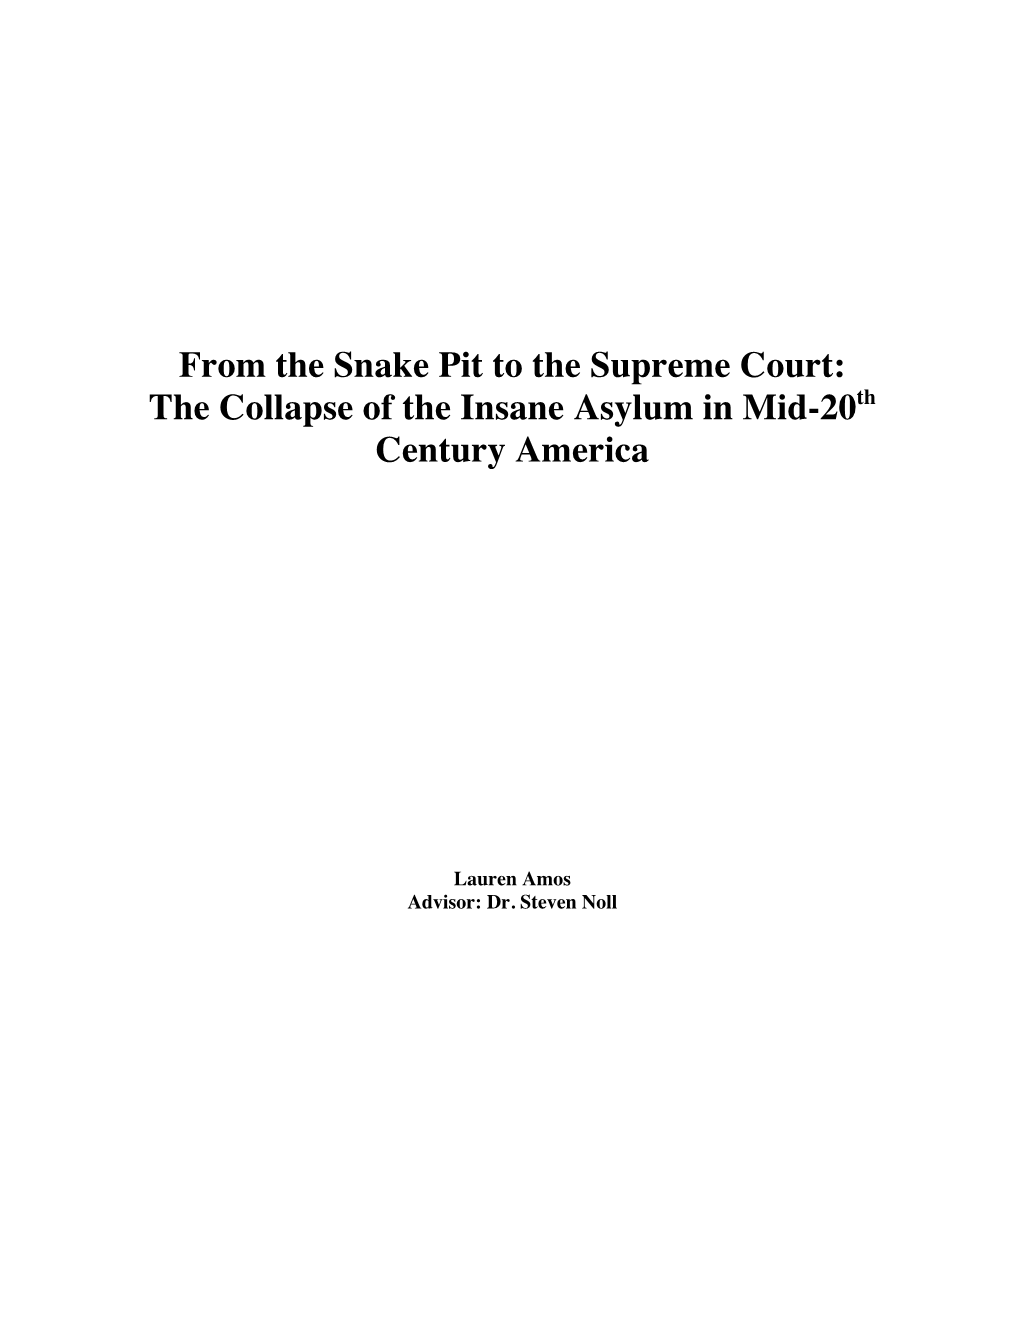 From the Snake Pit to the Supreme Court: the Collapse of the Insane Asylum in Mid-20Th Century America